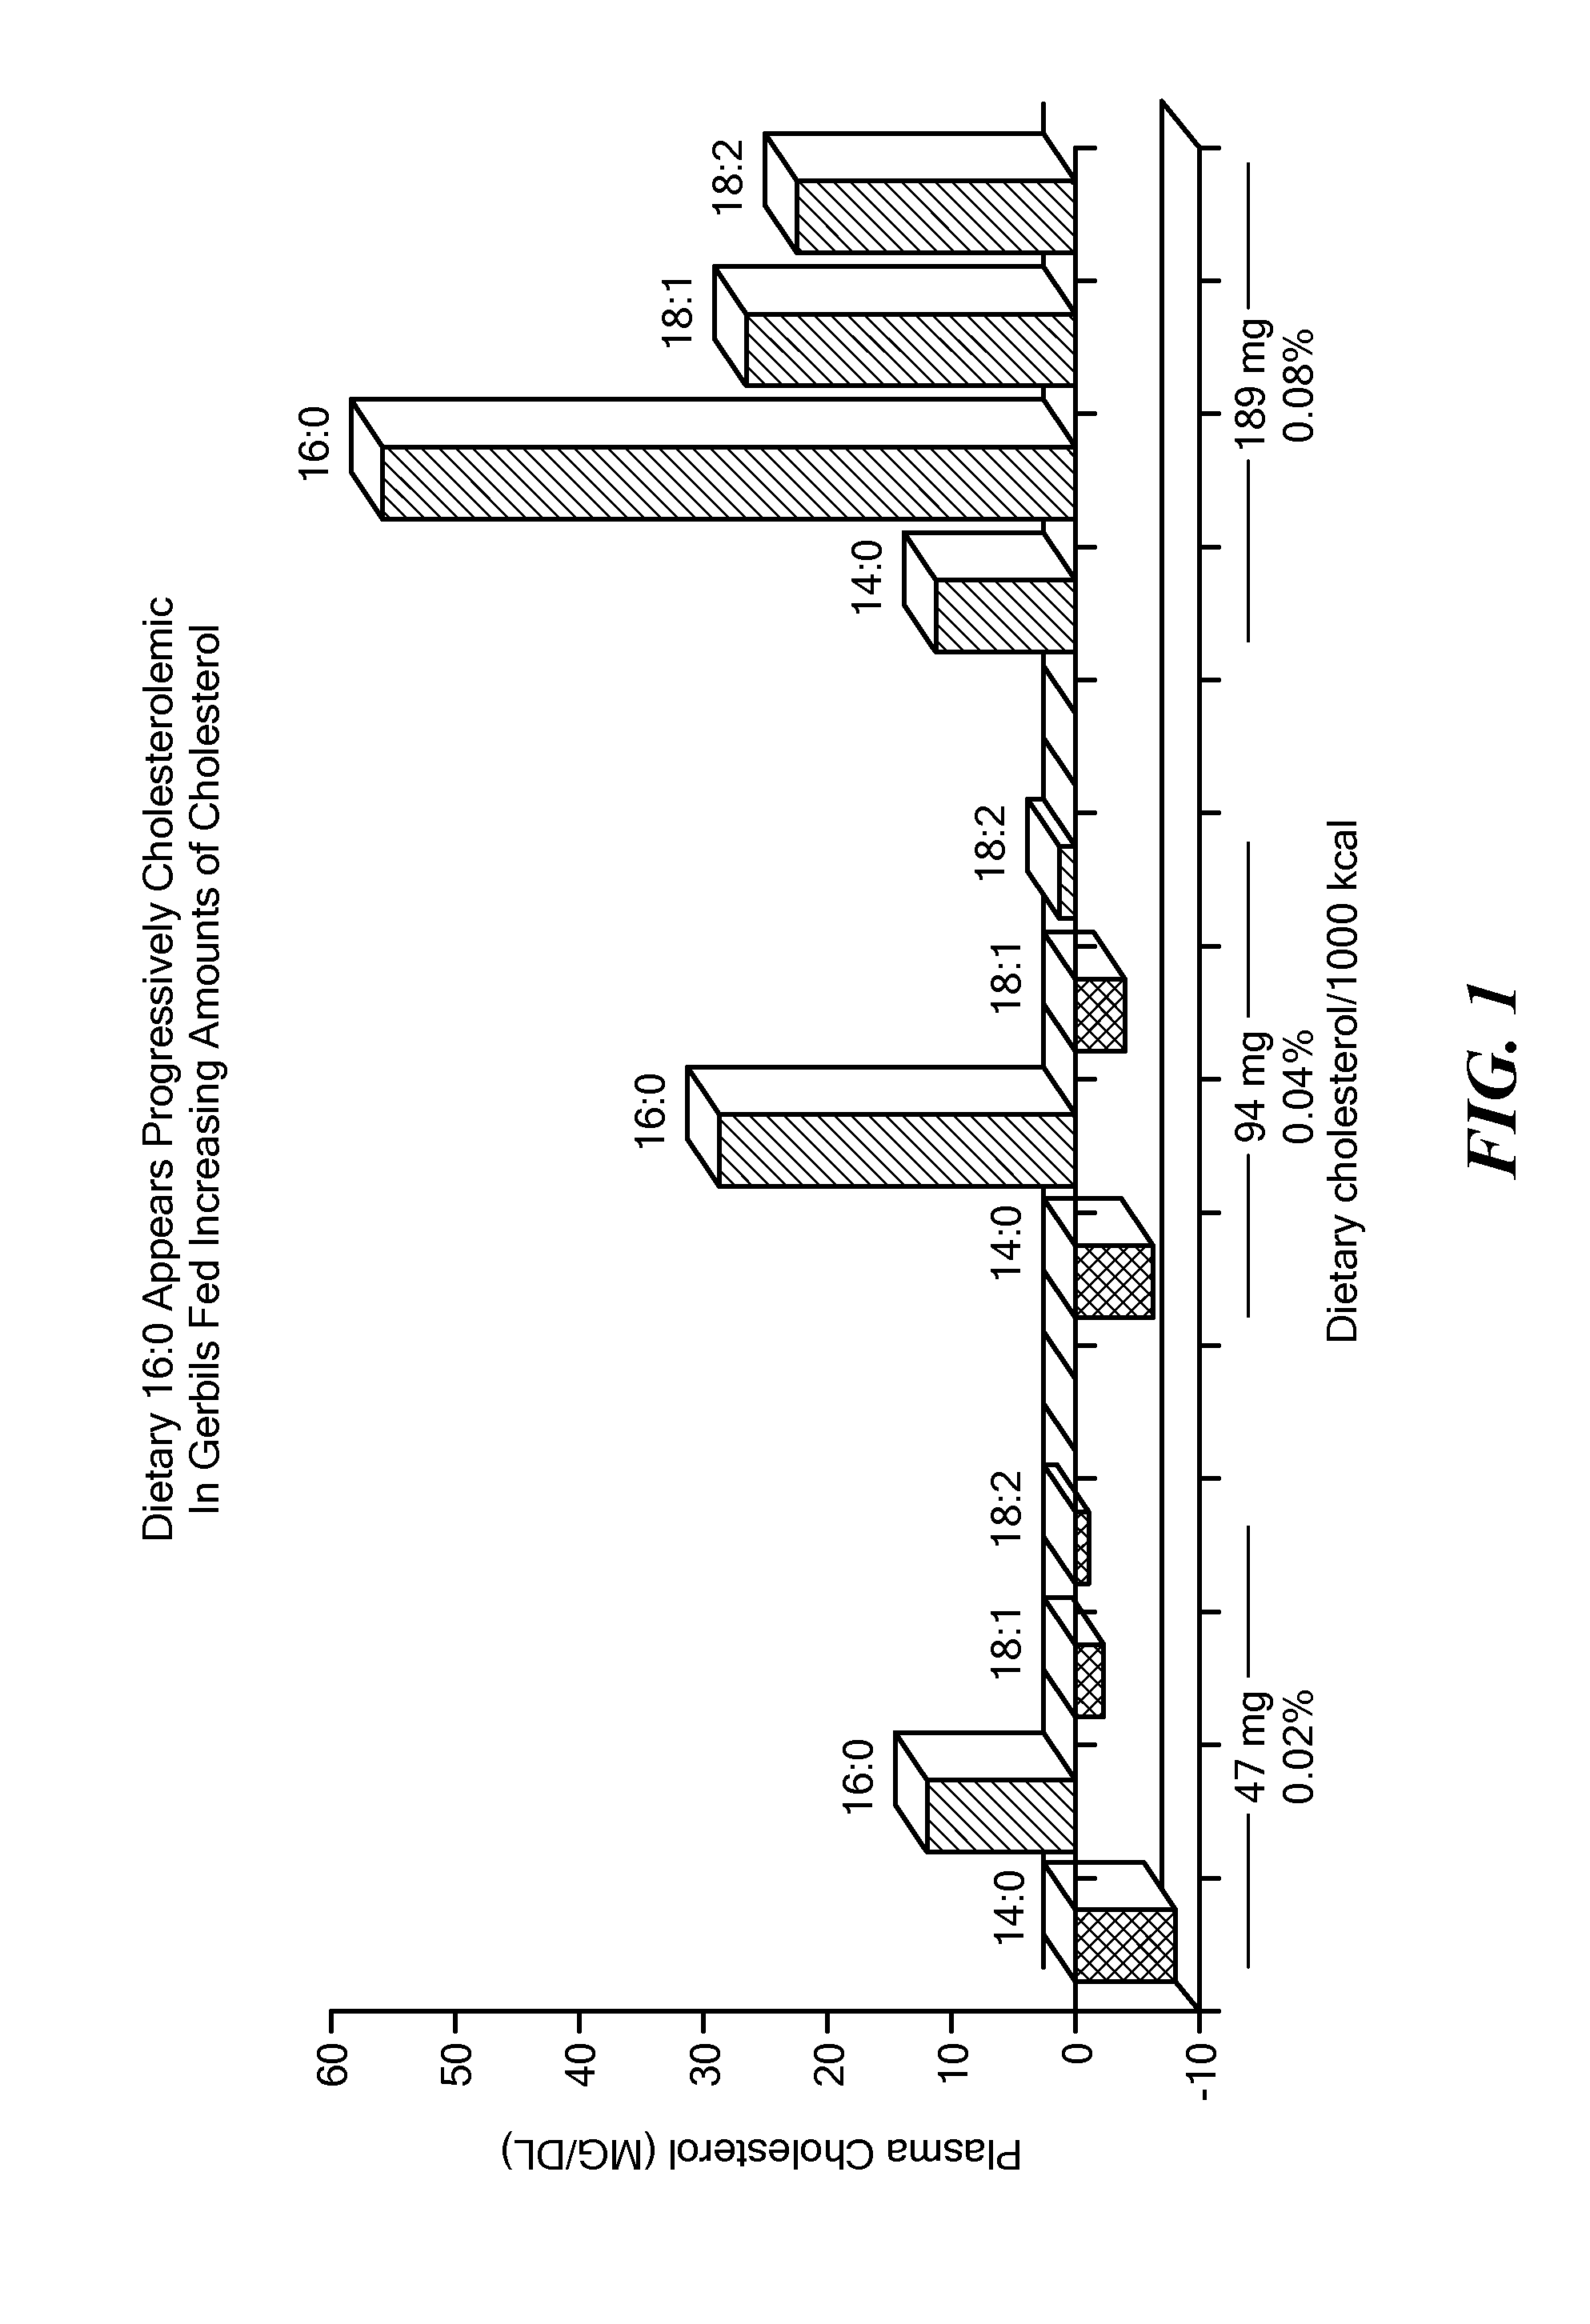 Balanced myristate-and laurate-containing edible oil